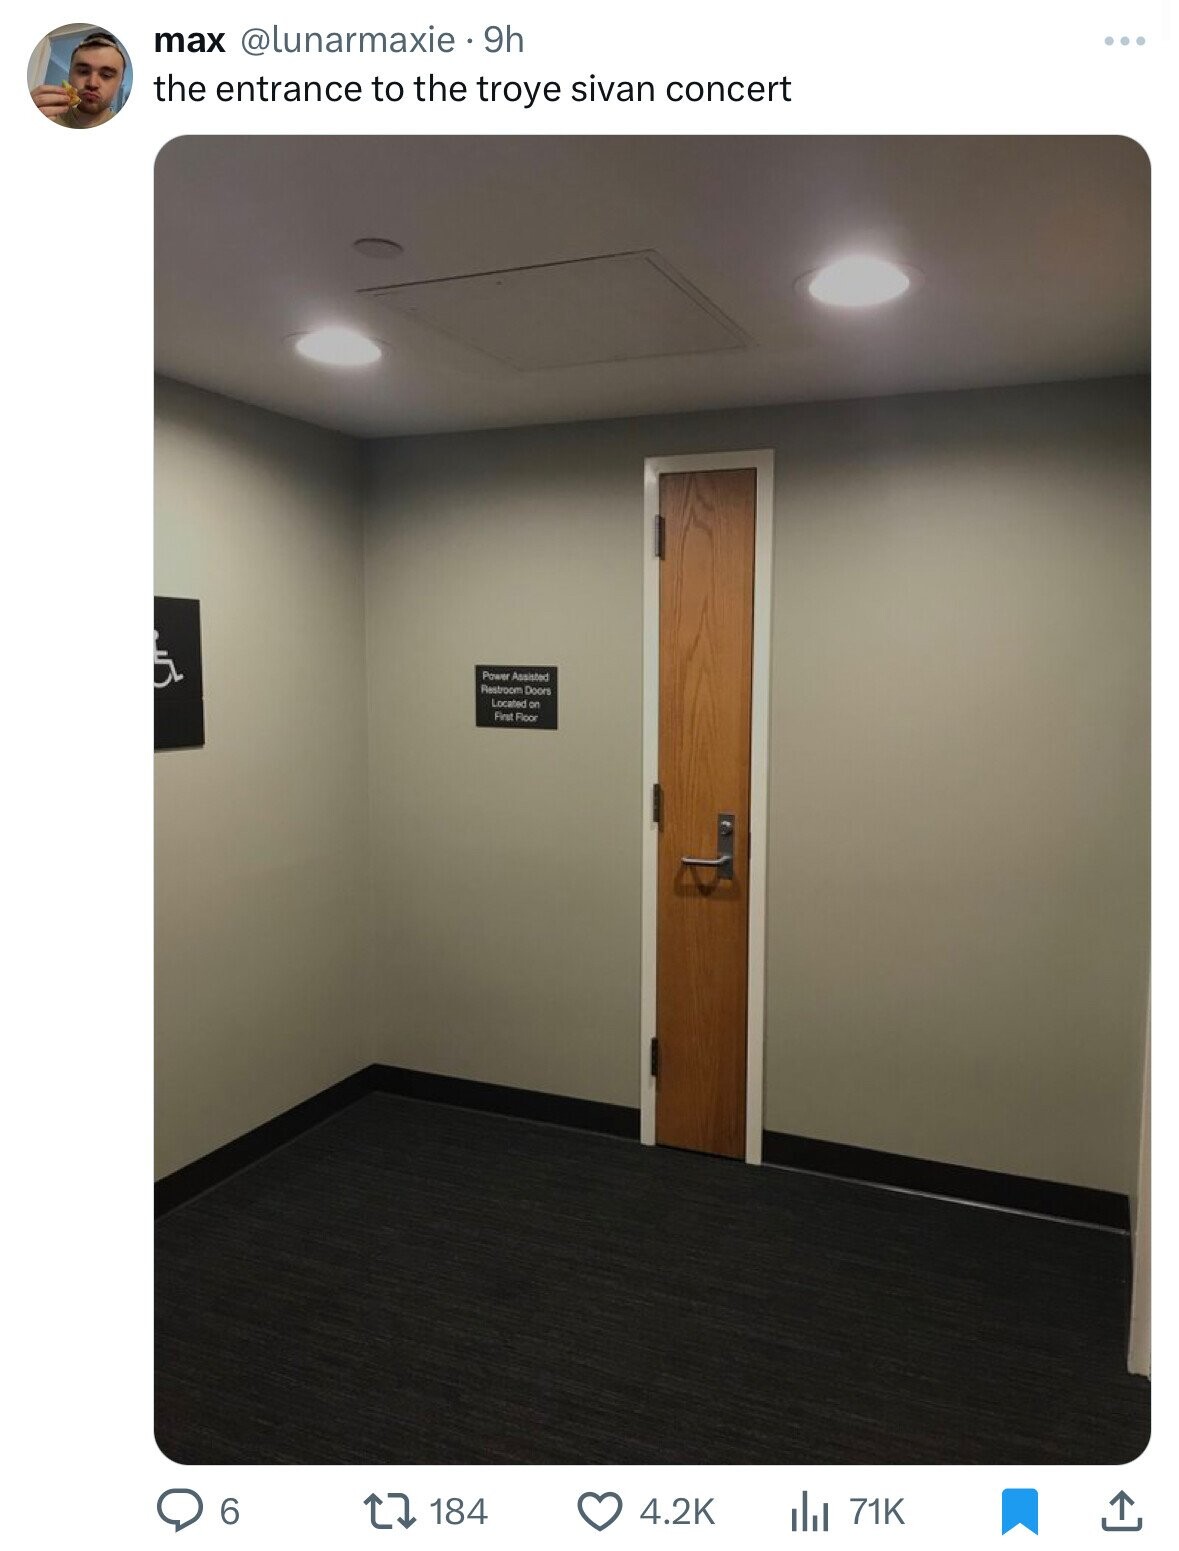 ceiling - max 9h the entrance to the troye sivan concert Power Assisted Restroom Doors Located on First Floor 6 184 71K